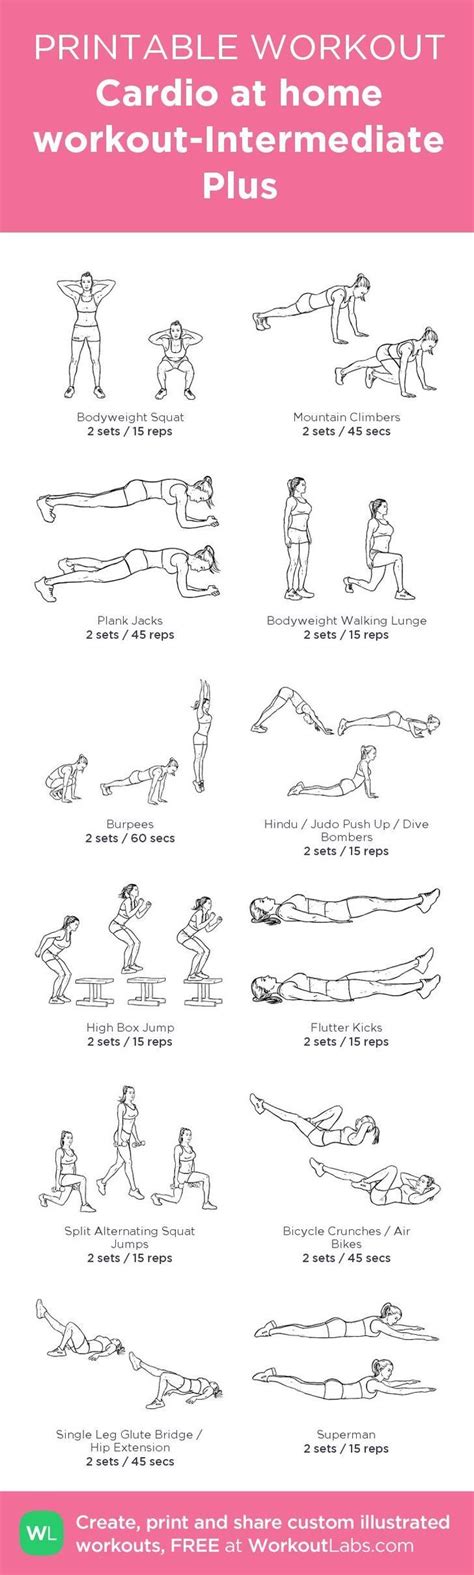 Printable Workouts We Love Workout Labs Cardio At Home At Home Workouts